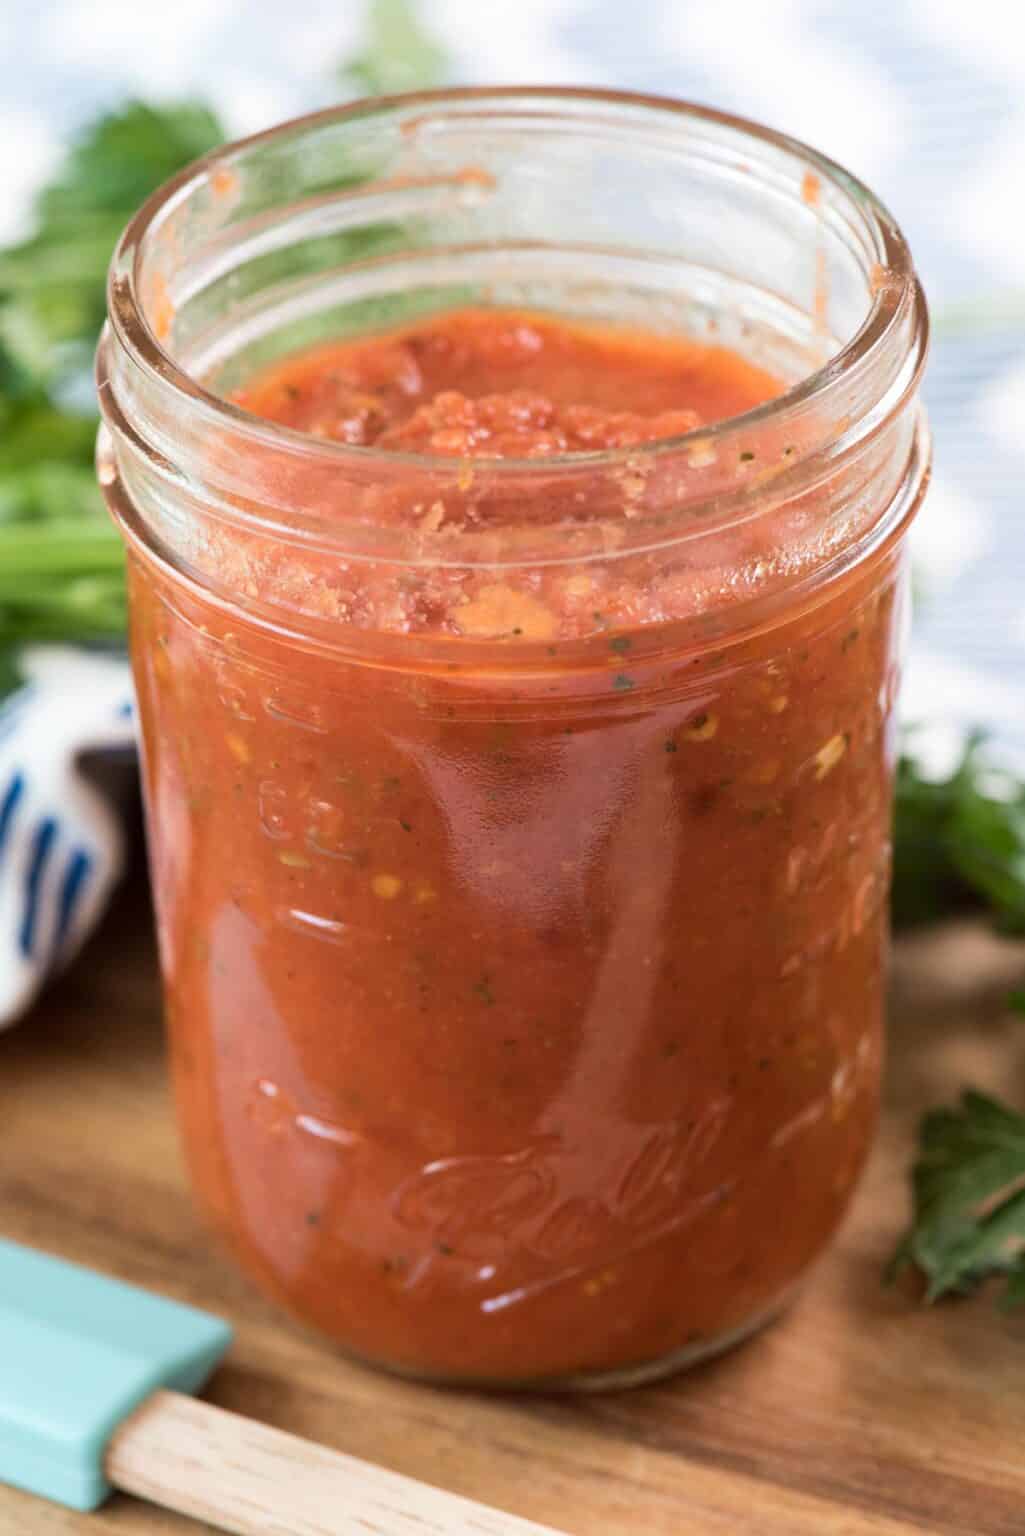 5-minute No Cook Pizza Sauce from scratch - Crazy for Crust